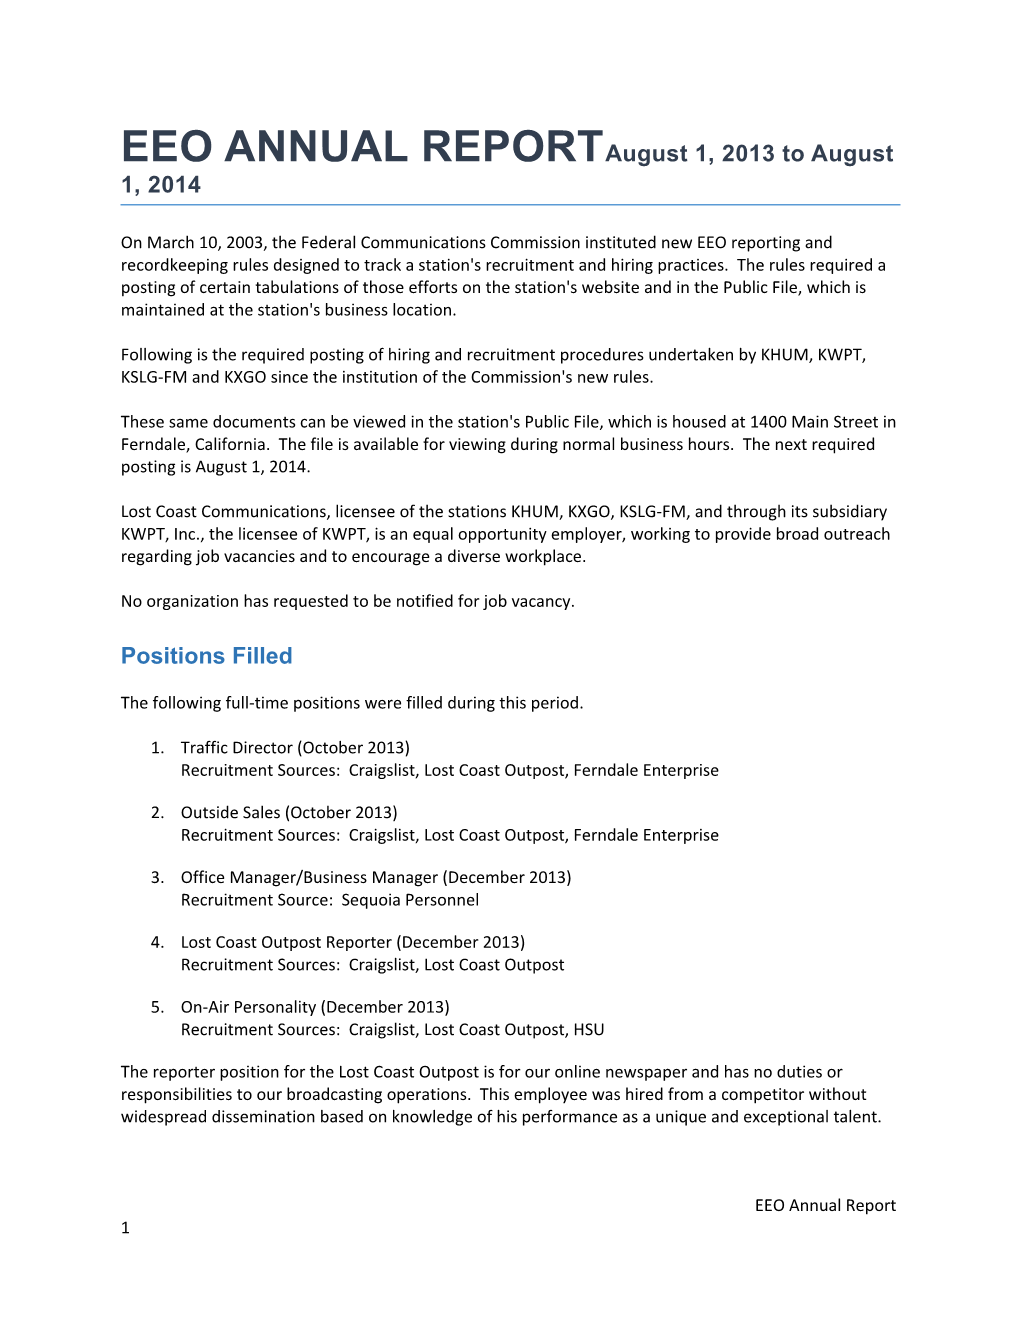 EEO ANNUAL REPORT August 1, 2013 to August 1, 2014